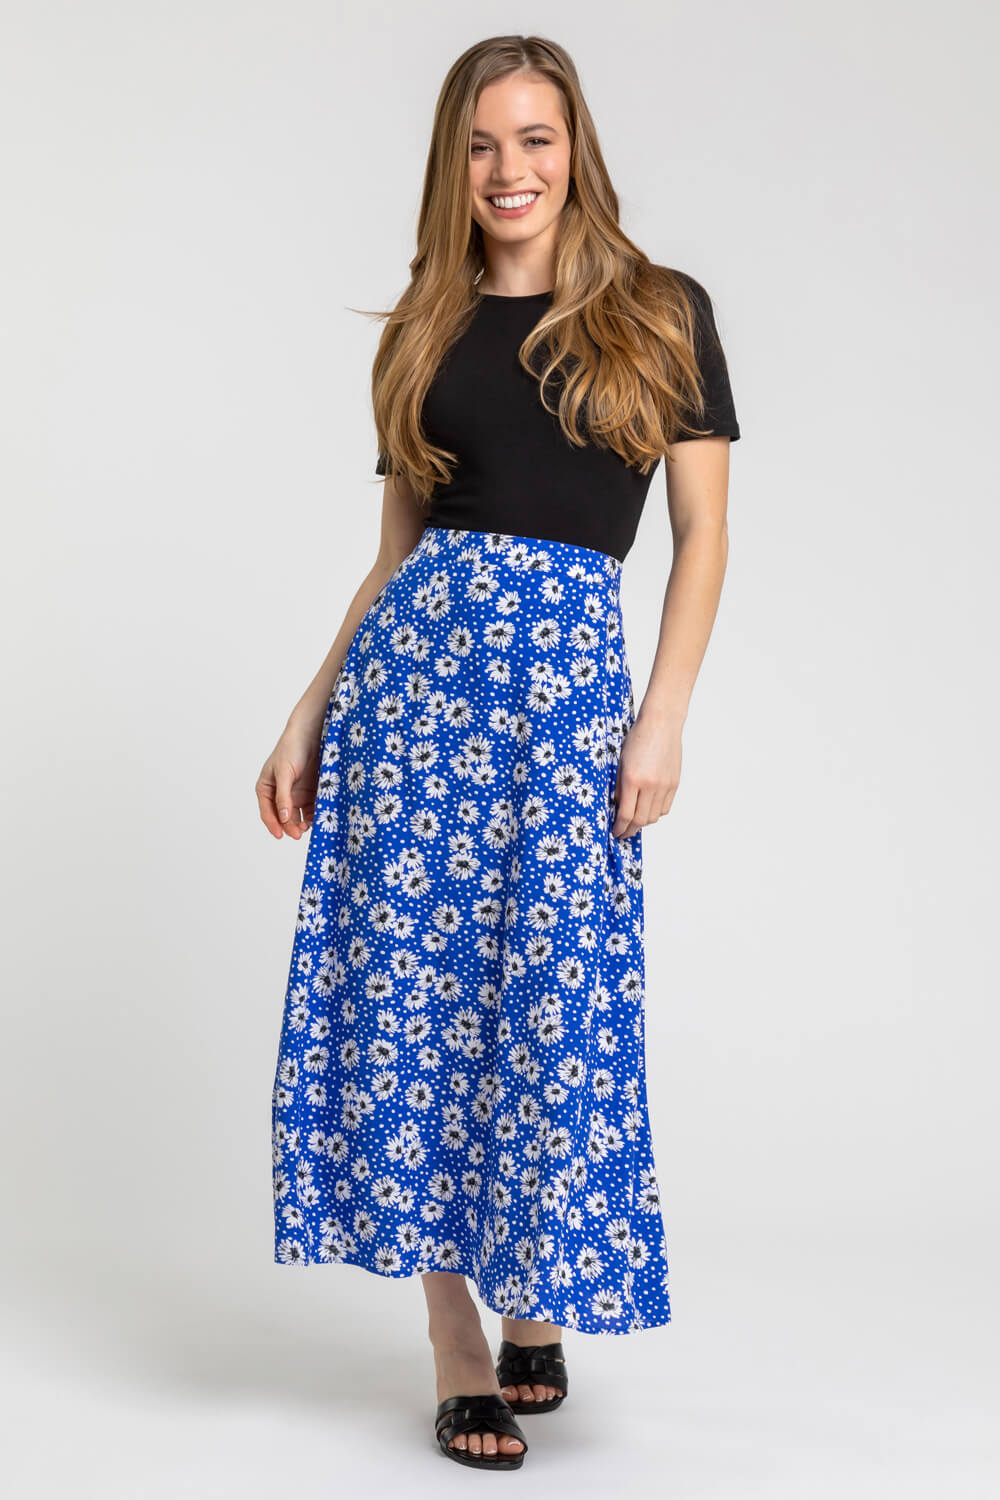 Blue Petite Floral Print A-Line Skirt, Image 3 of 4